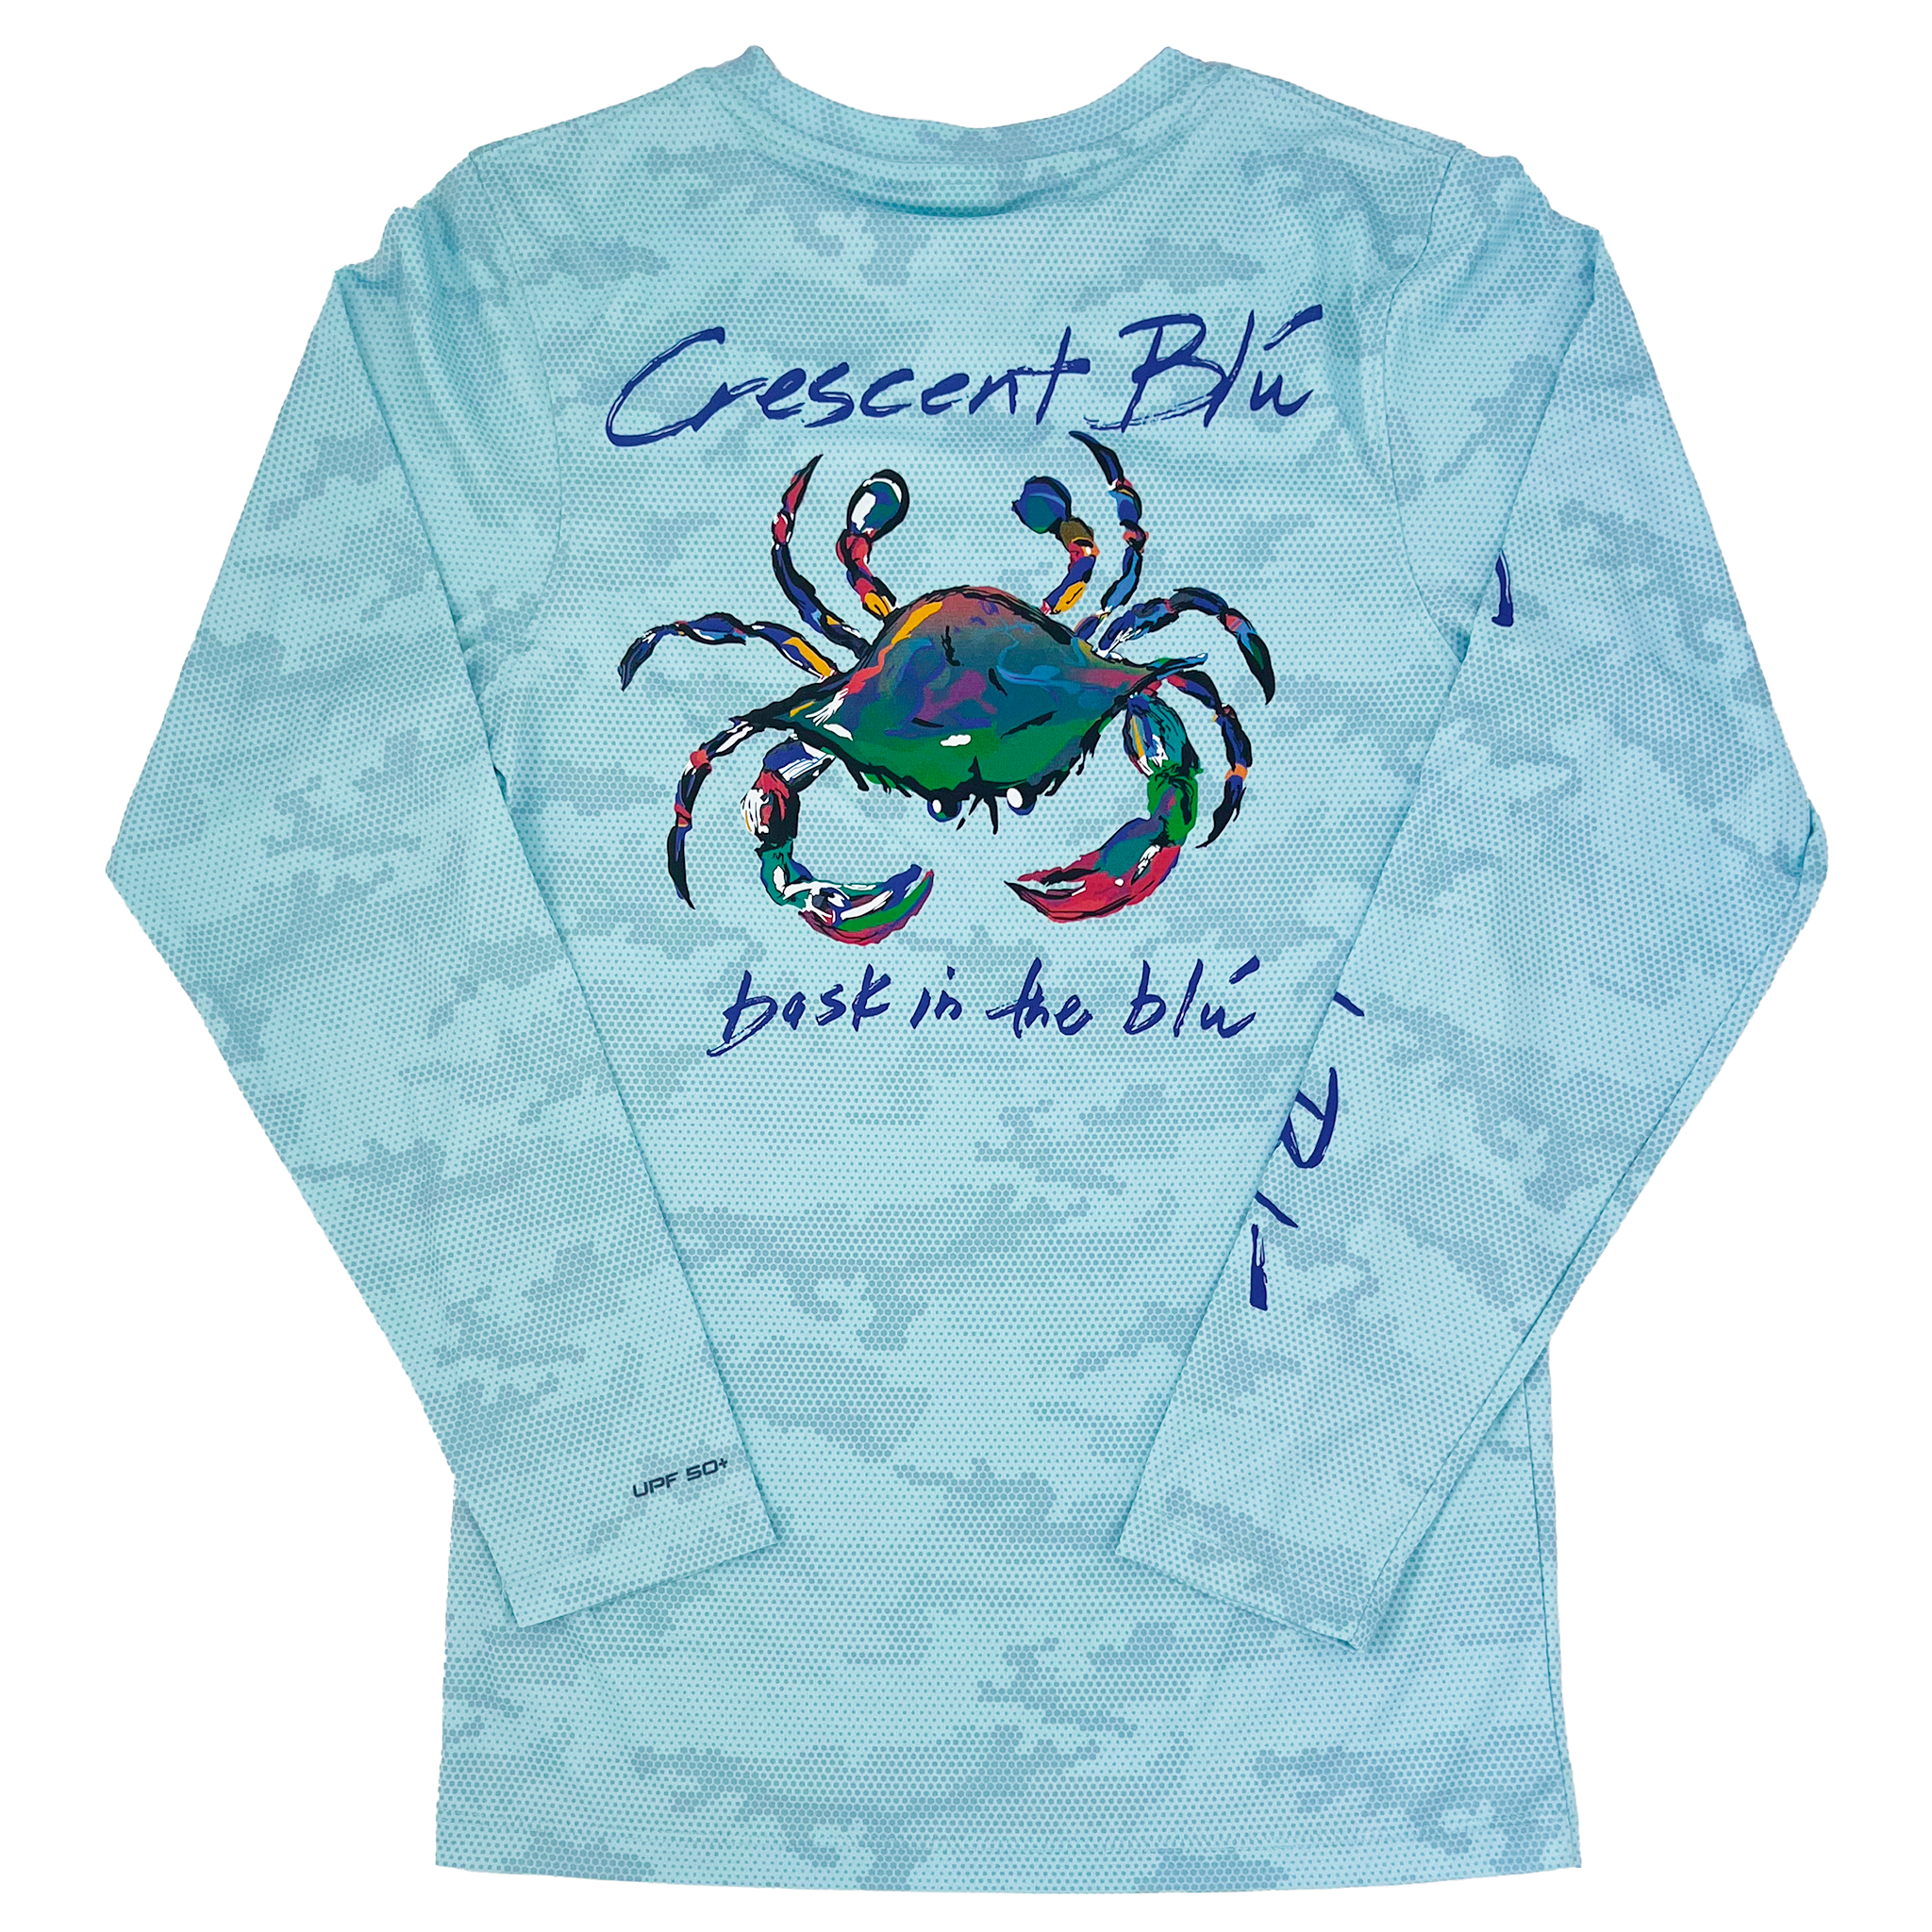 View of back of Aqua Camo adult long sleeve Performance Sun Shirt UPF 50+. Crescent Blu multicolored logo printed along with Bask in the Blu tagline. 